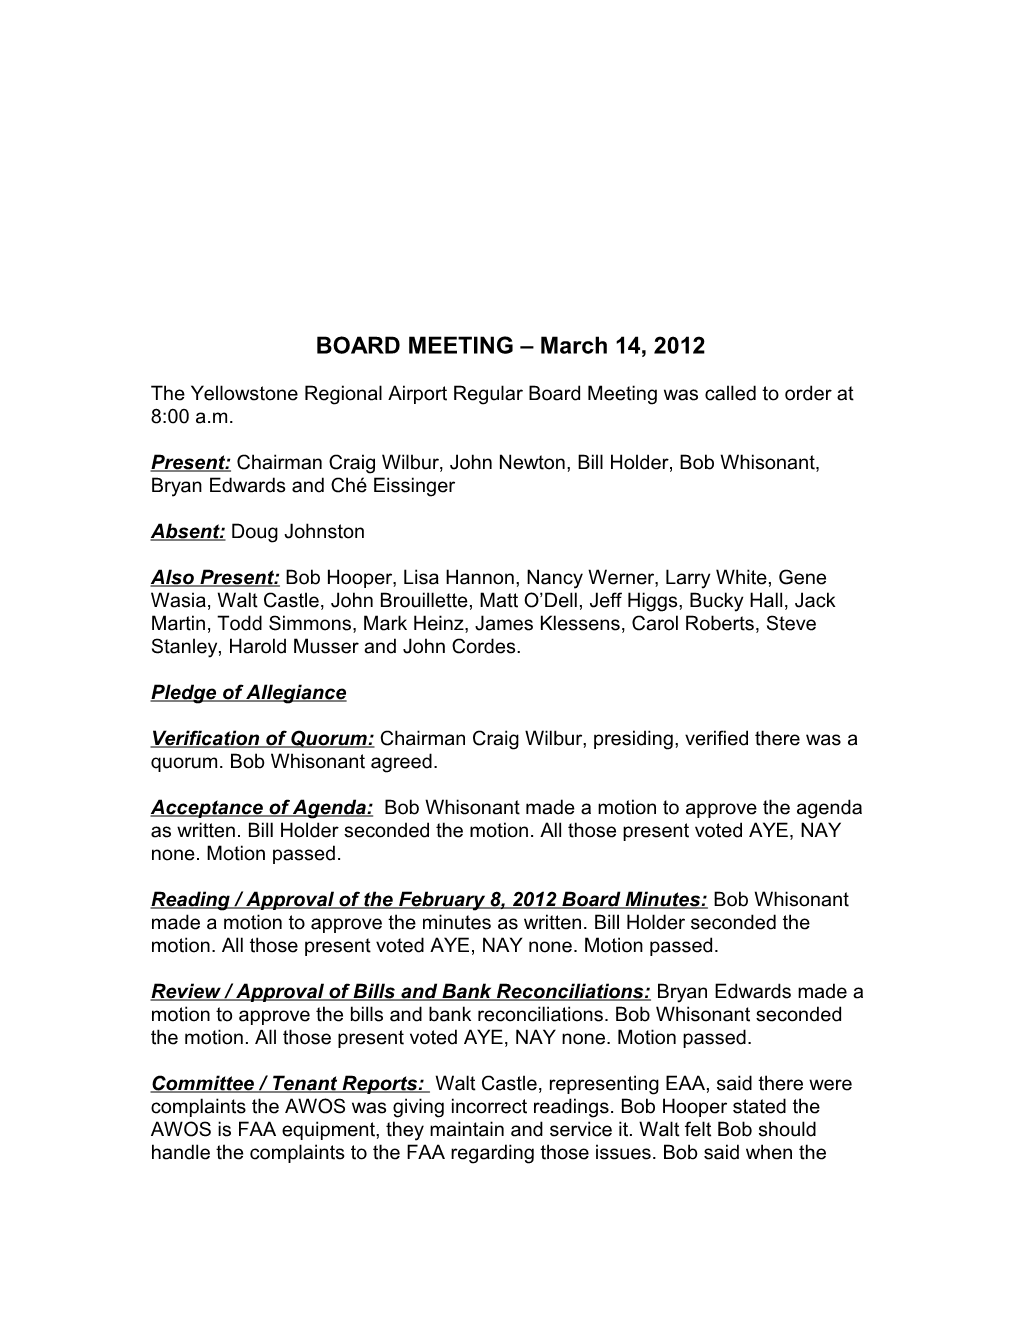 The Yellowstone Regional Airport Regular Board Meeting Was Called to Order at 8:00 A.M s1